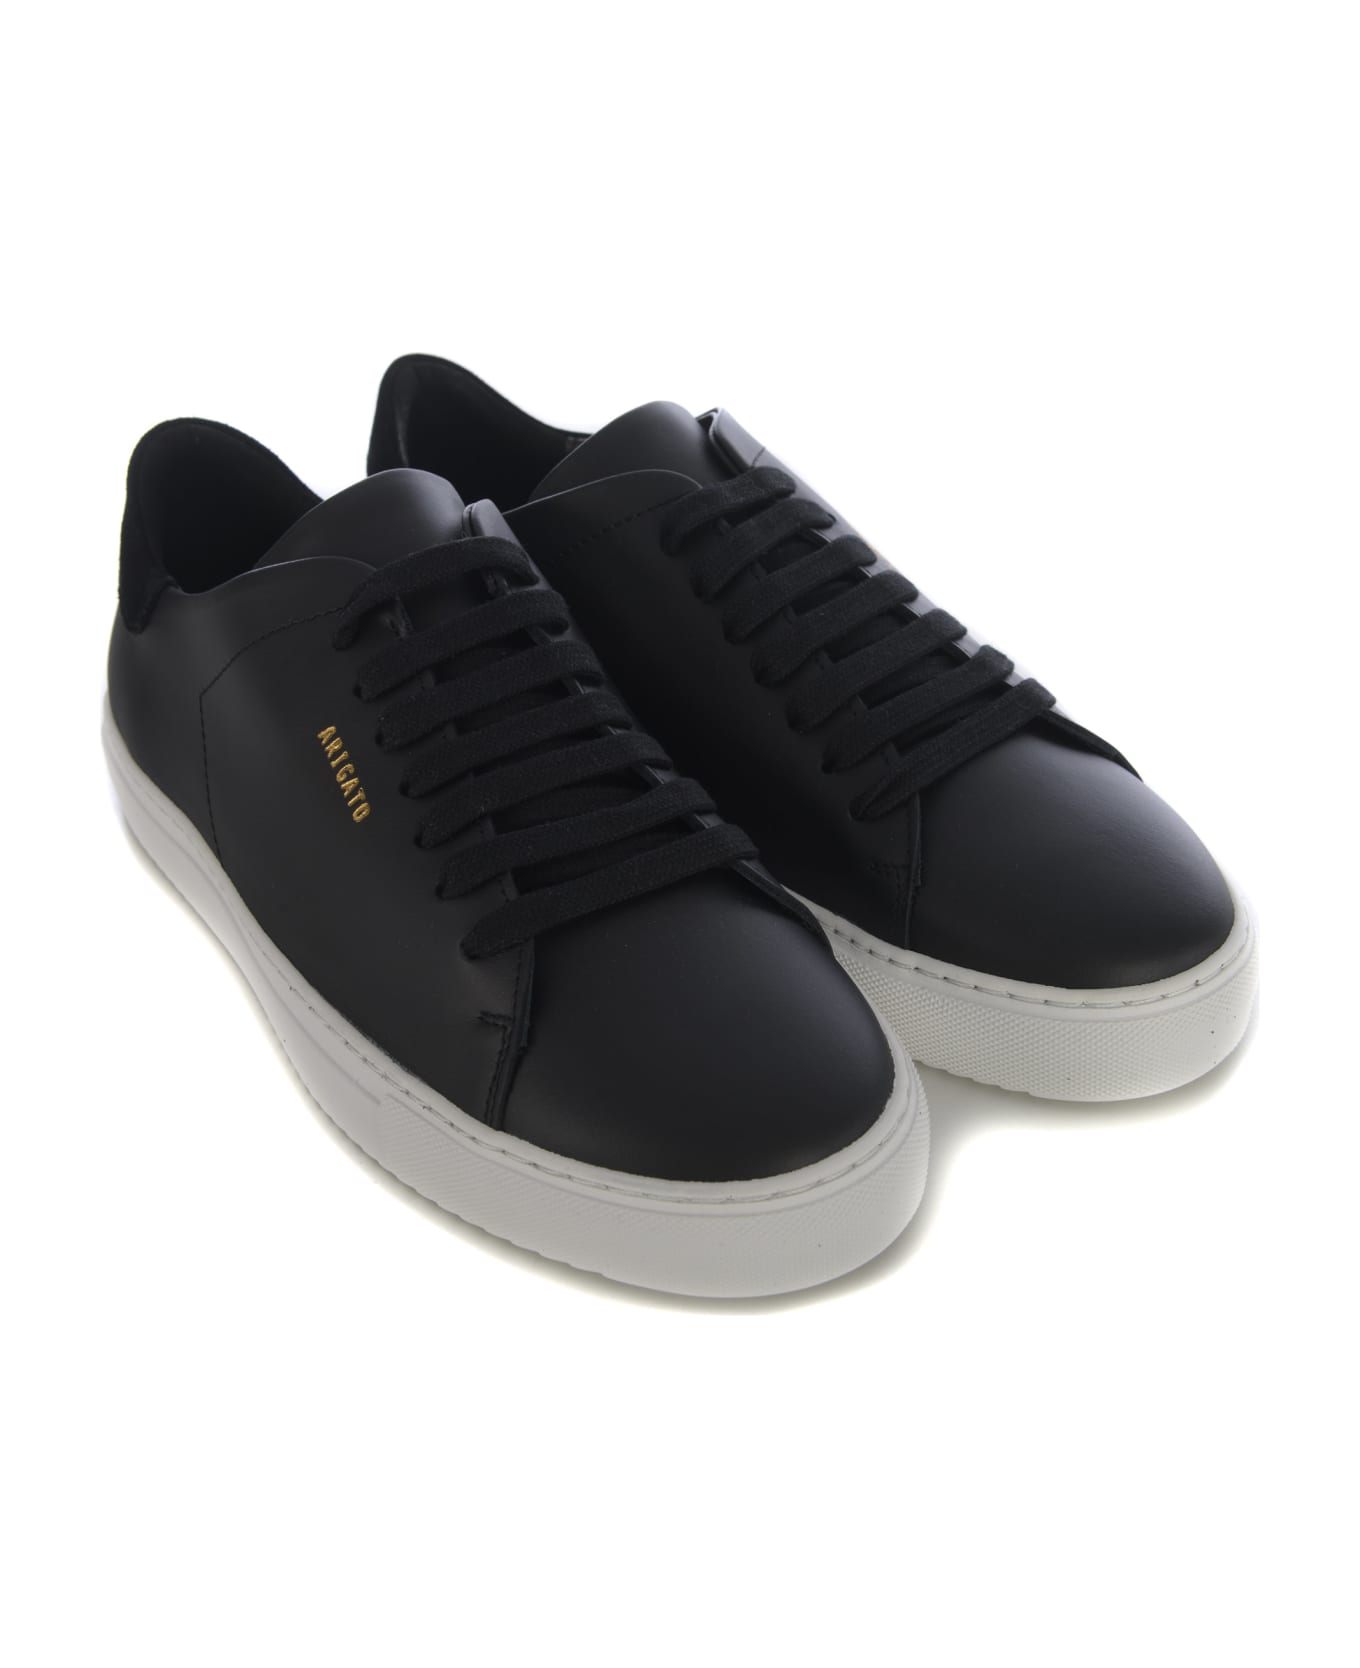 Axel Arigato Sneakers Axel Arigato "clean 90" Made Of Leather - Nero